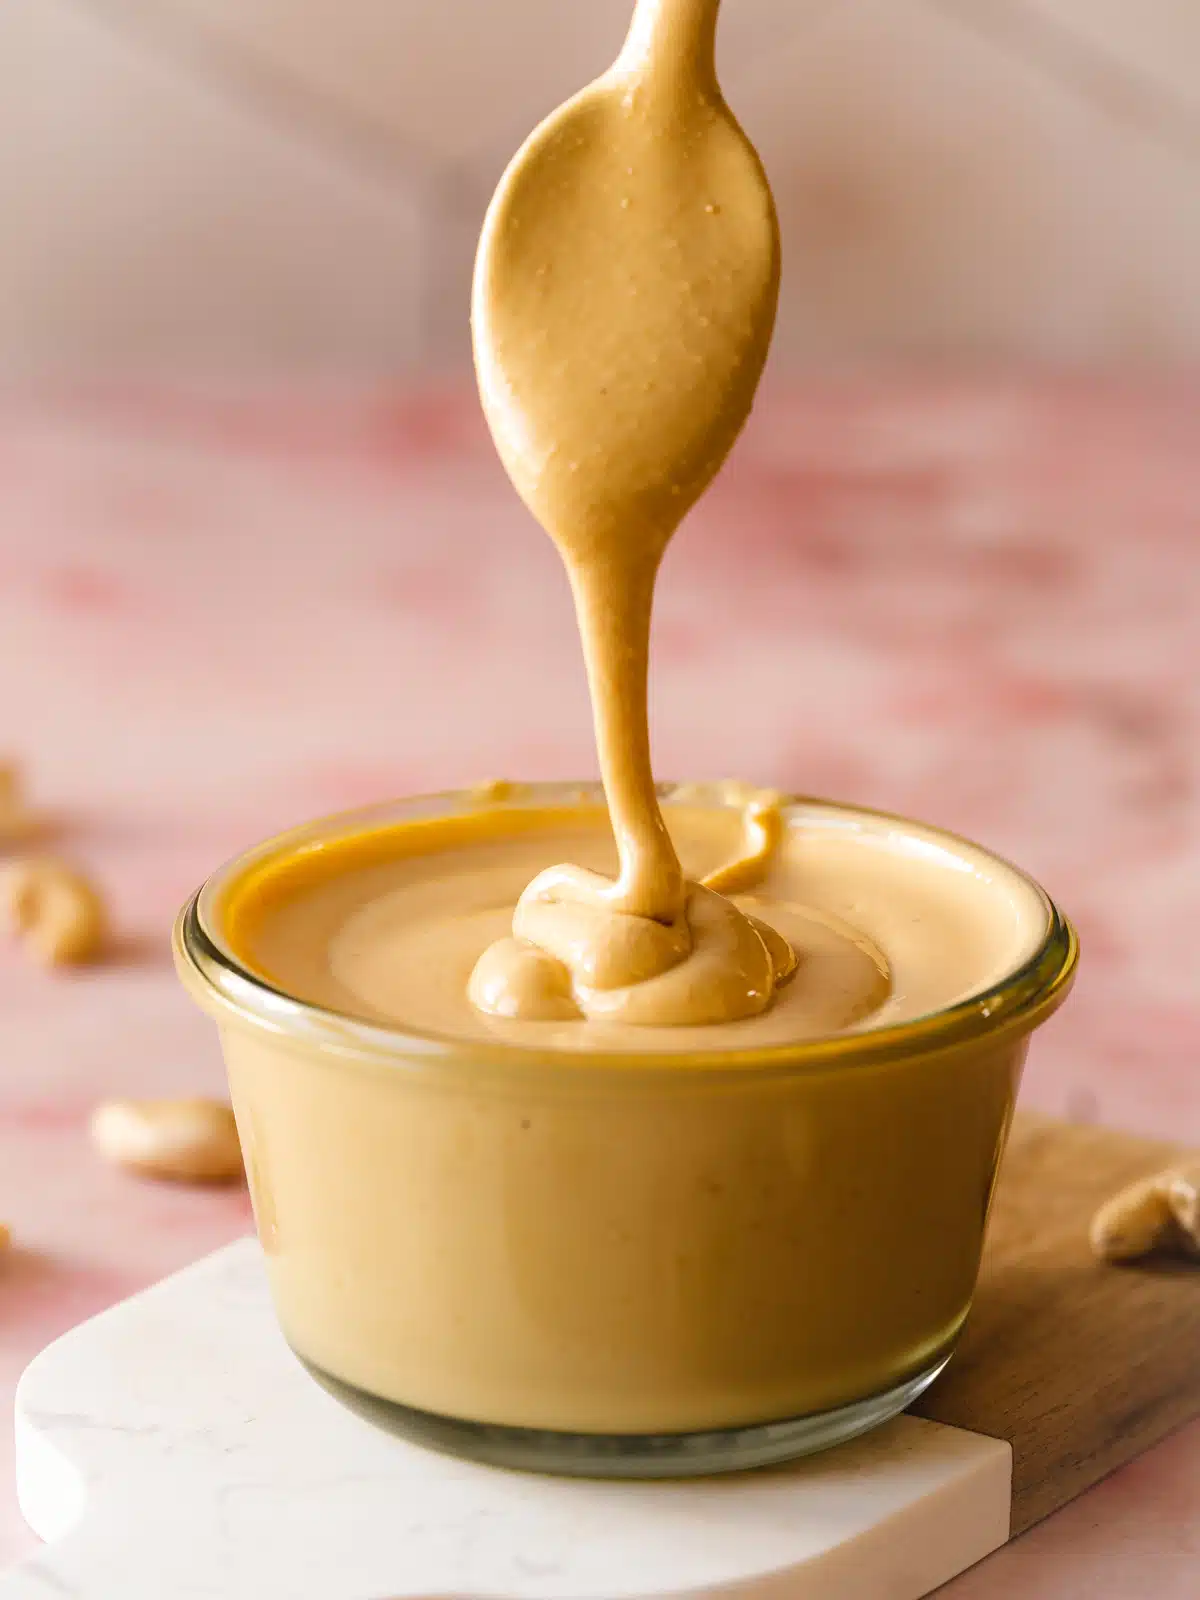 a glass jar with cashew butter being drizzled into it with a spoon showing the creamy texture.